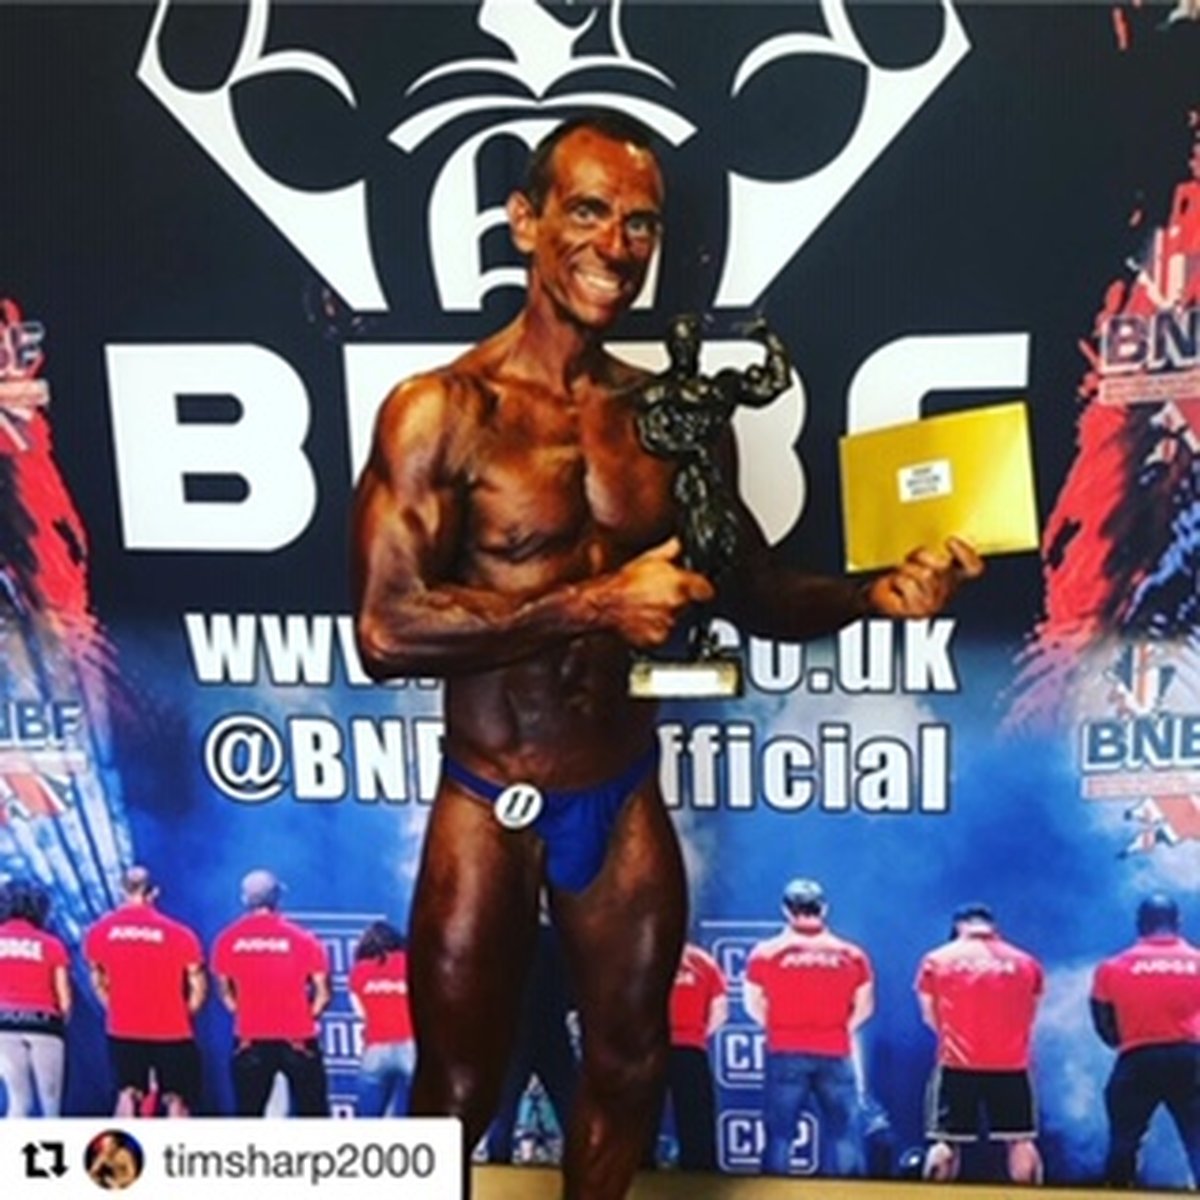 Background Images from the 2019 BNBF WelshImage with link to high resolution version